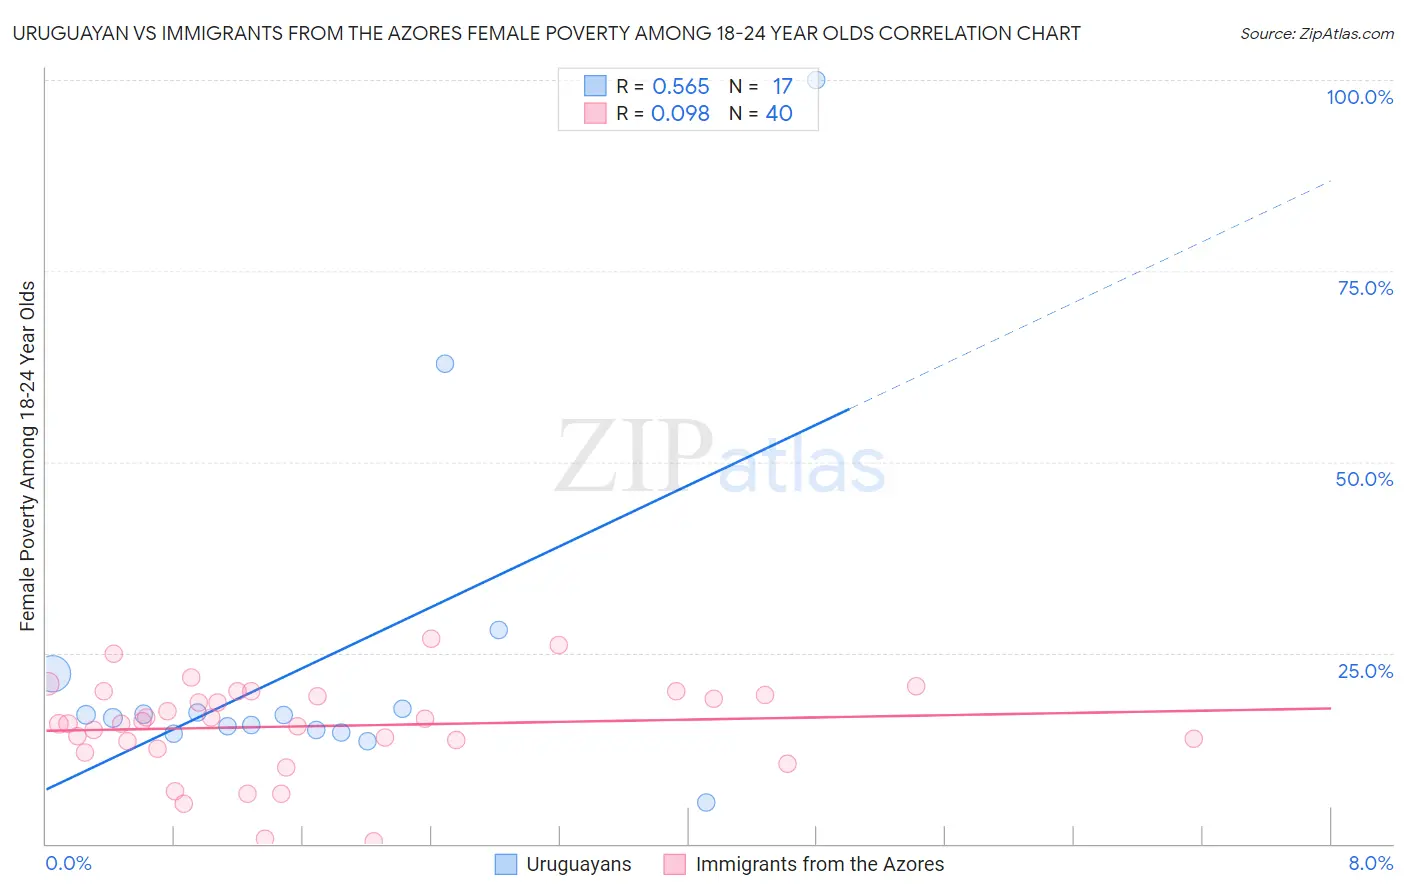 Uruguayan vs Immigrants from the Azores Female Poverty Among 18-24 Year Olds